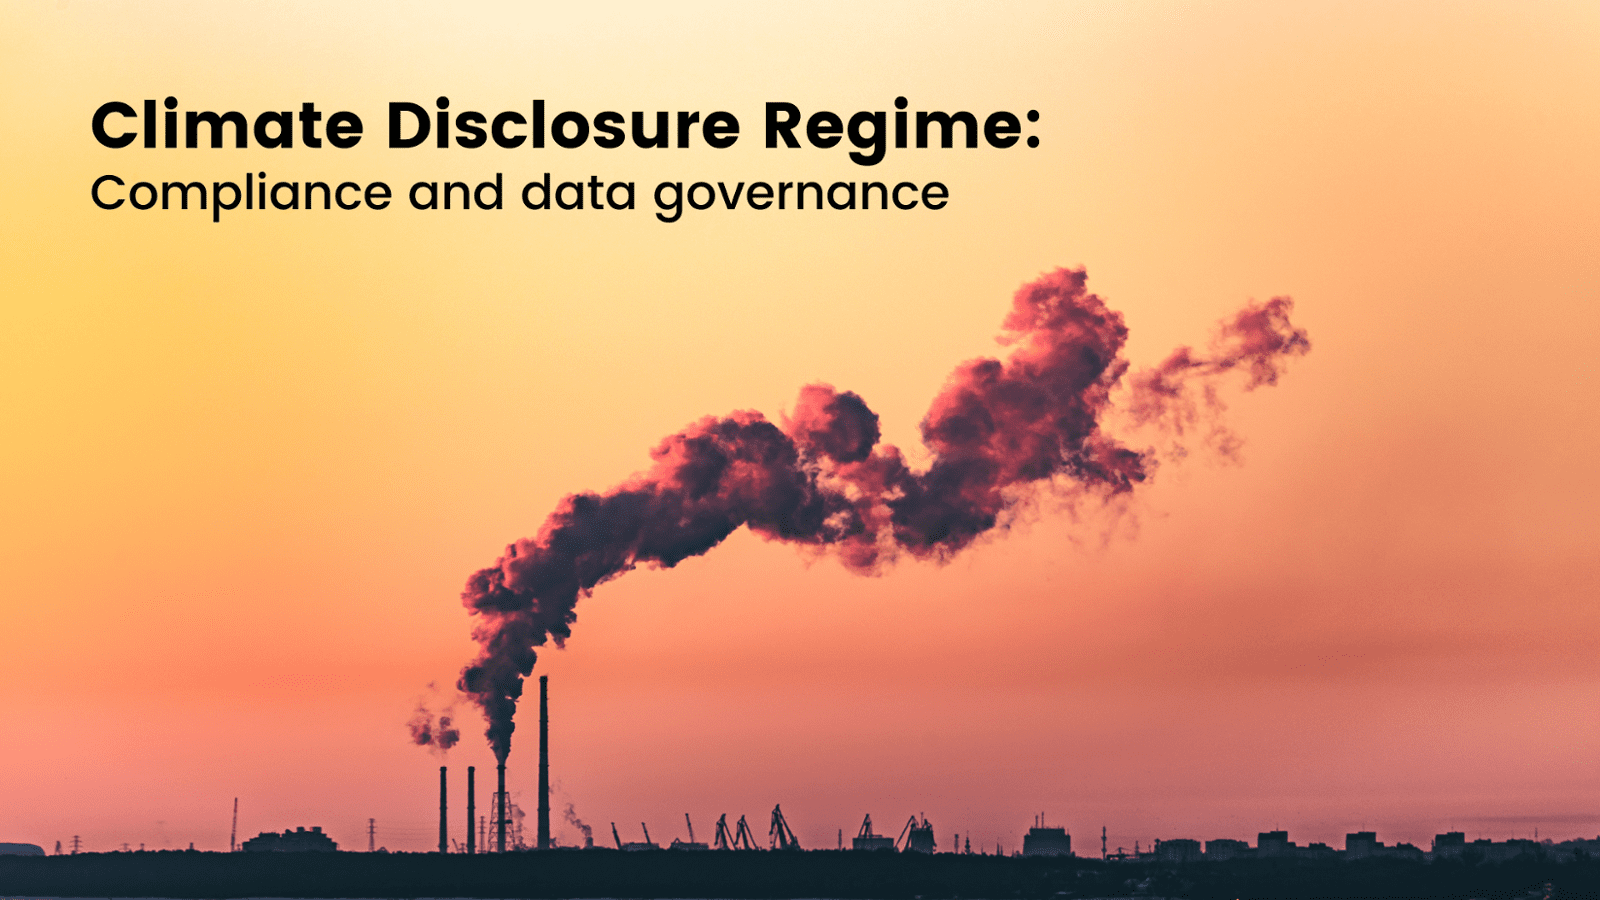 NZ Climate Disclosure Regime: compliance and good data governance